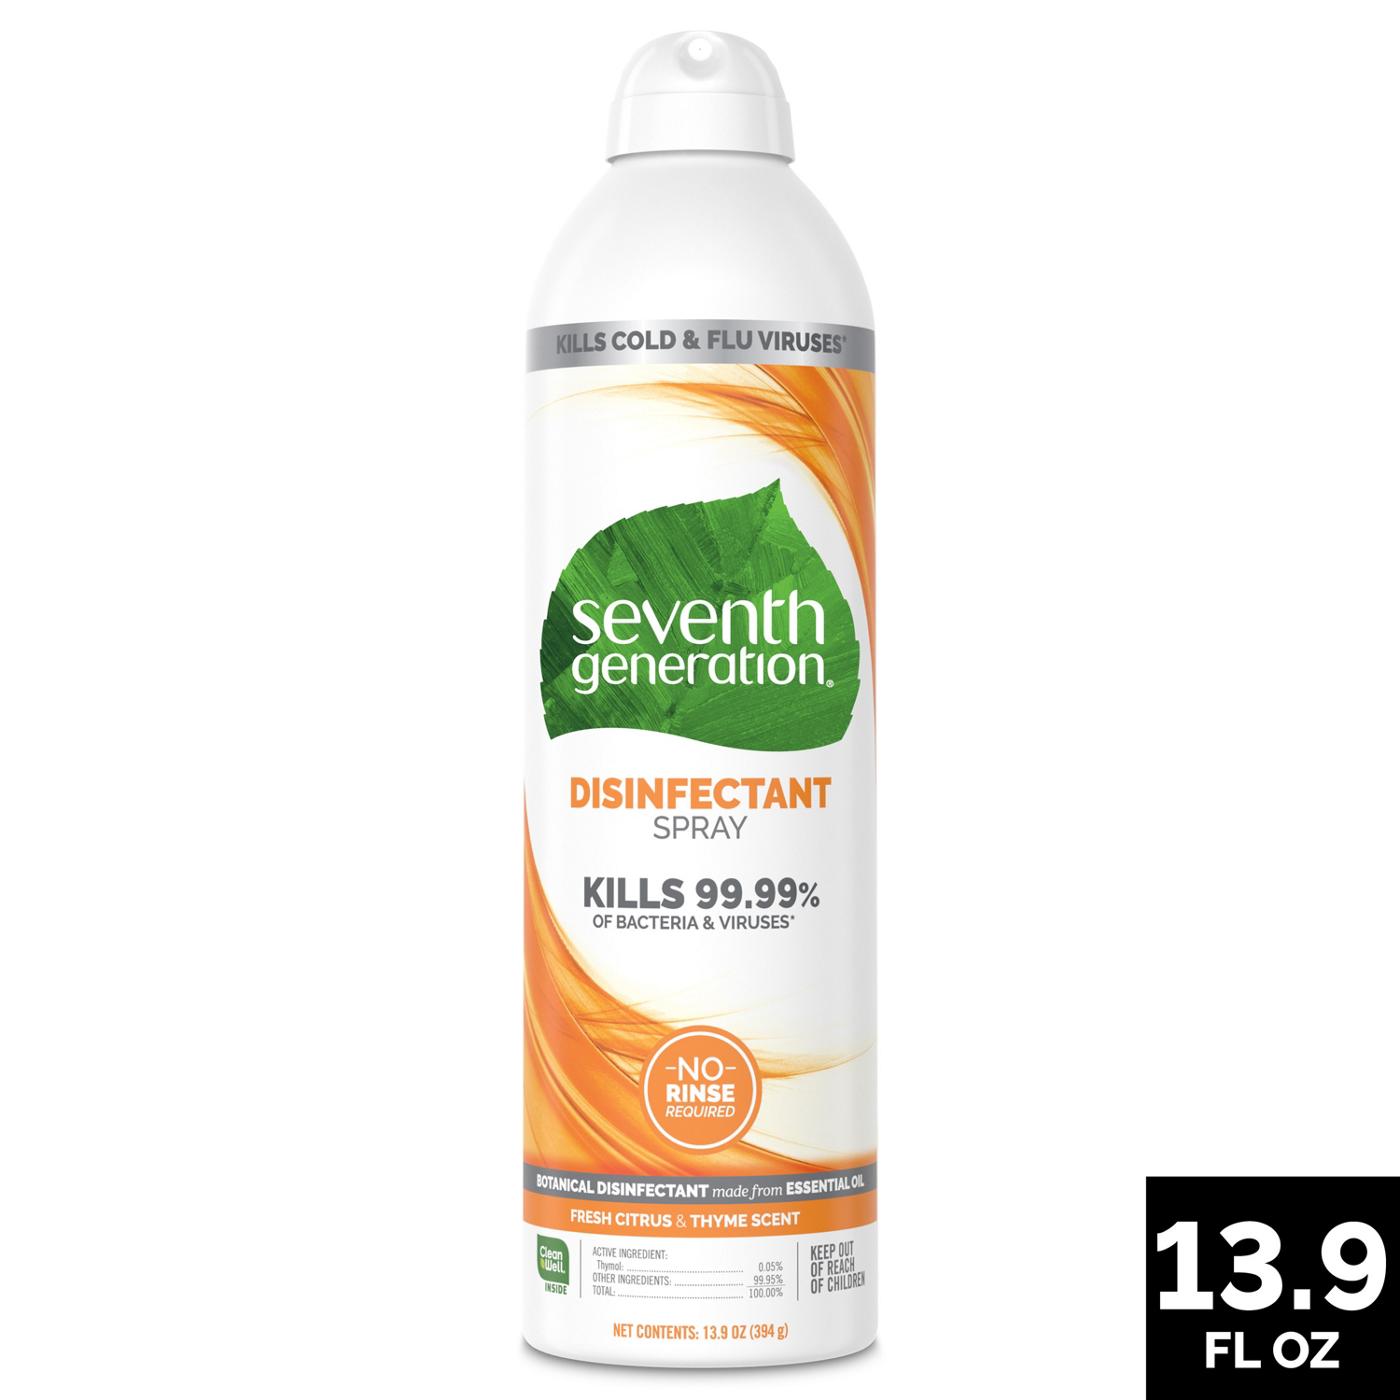 Seventh Generation Fresh Citrus and Thyme Disinfectant Spray; image 10 of 10